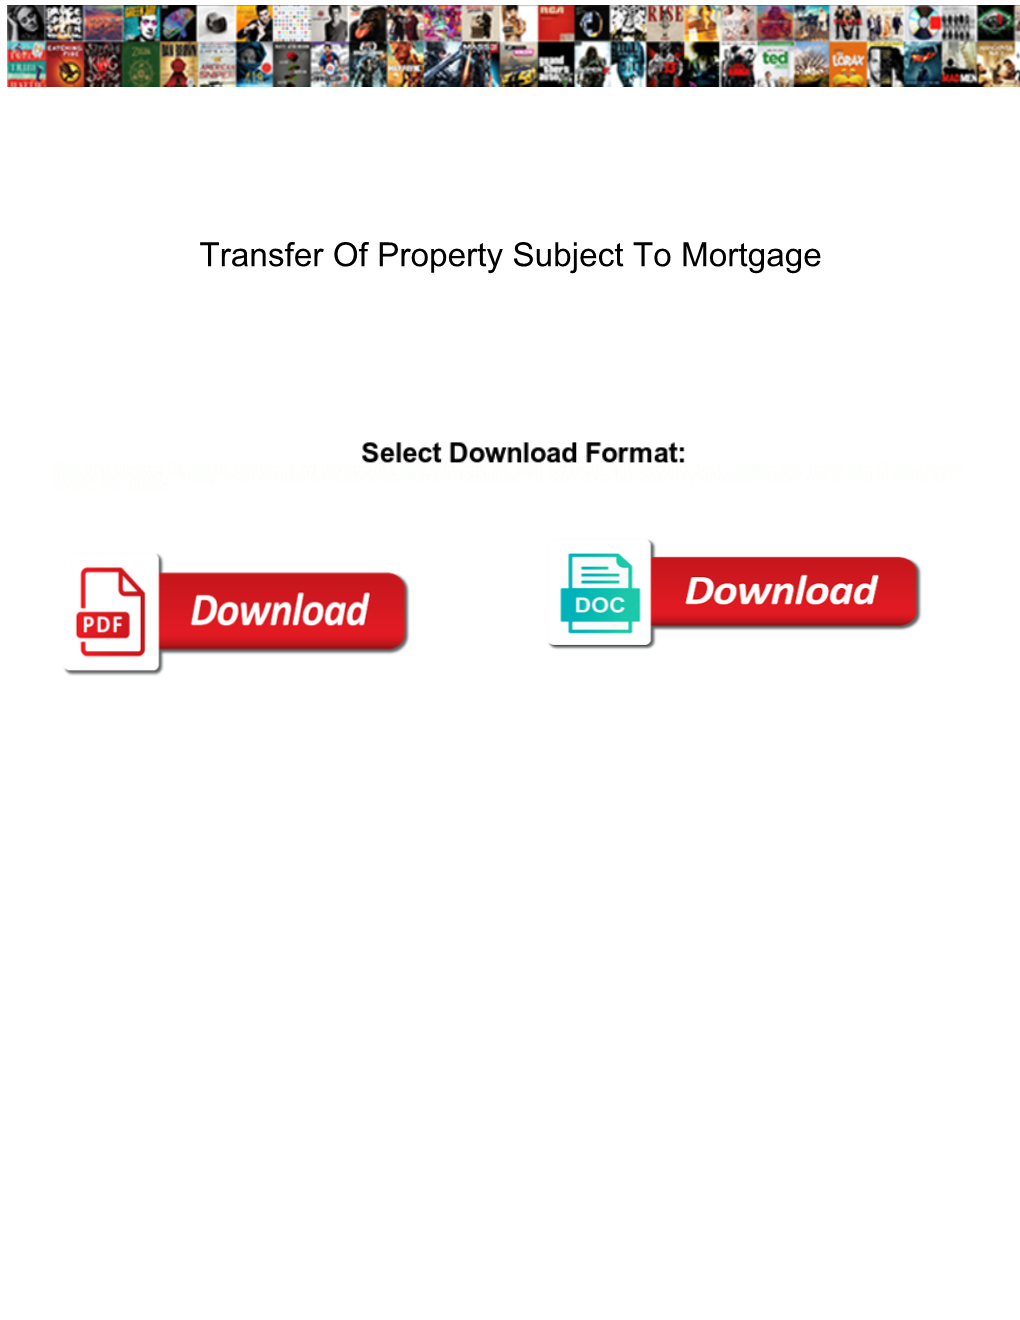 Transfer of Property Subject to Mortgage Russian